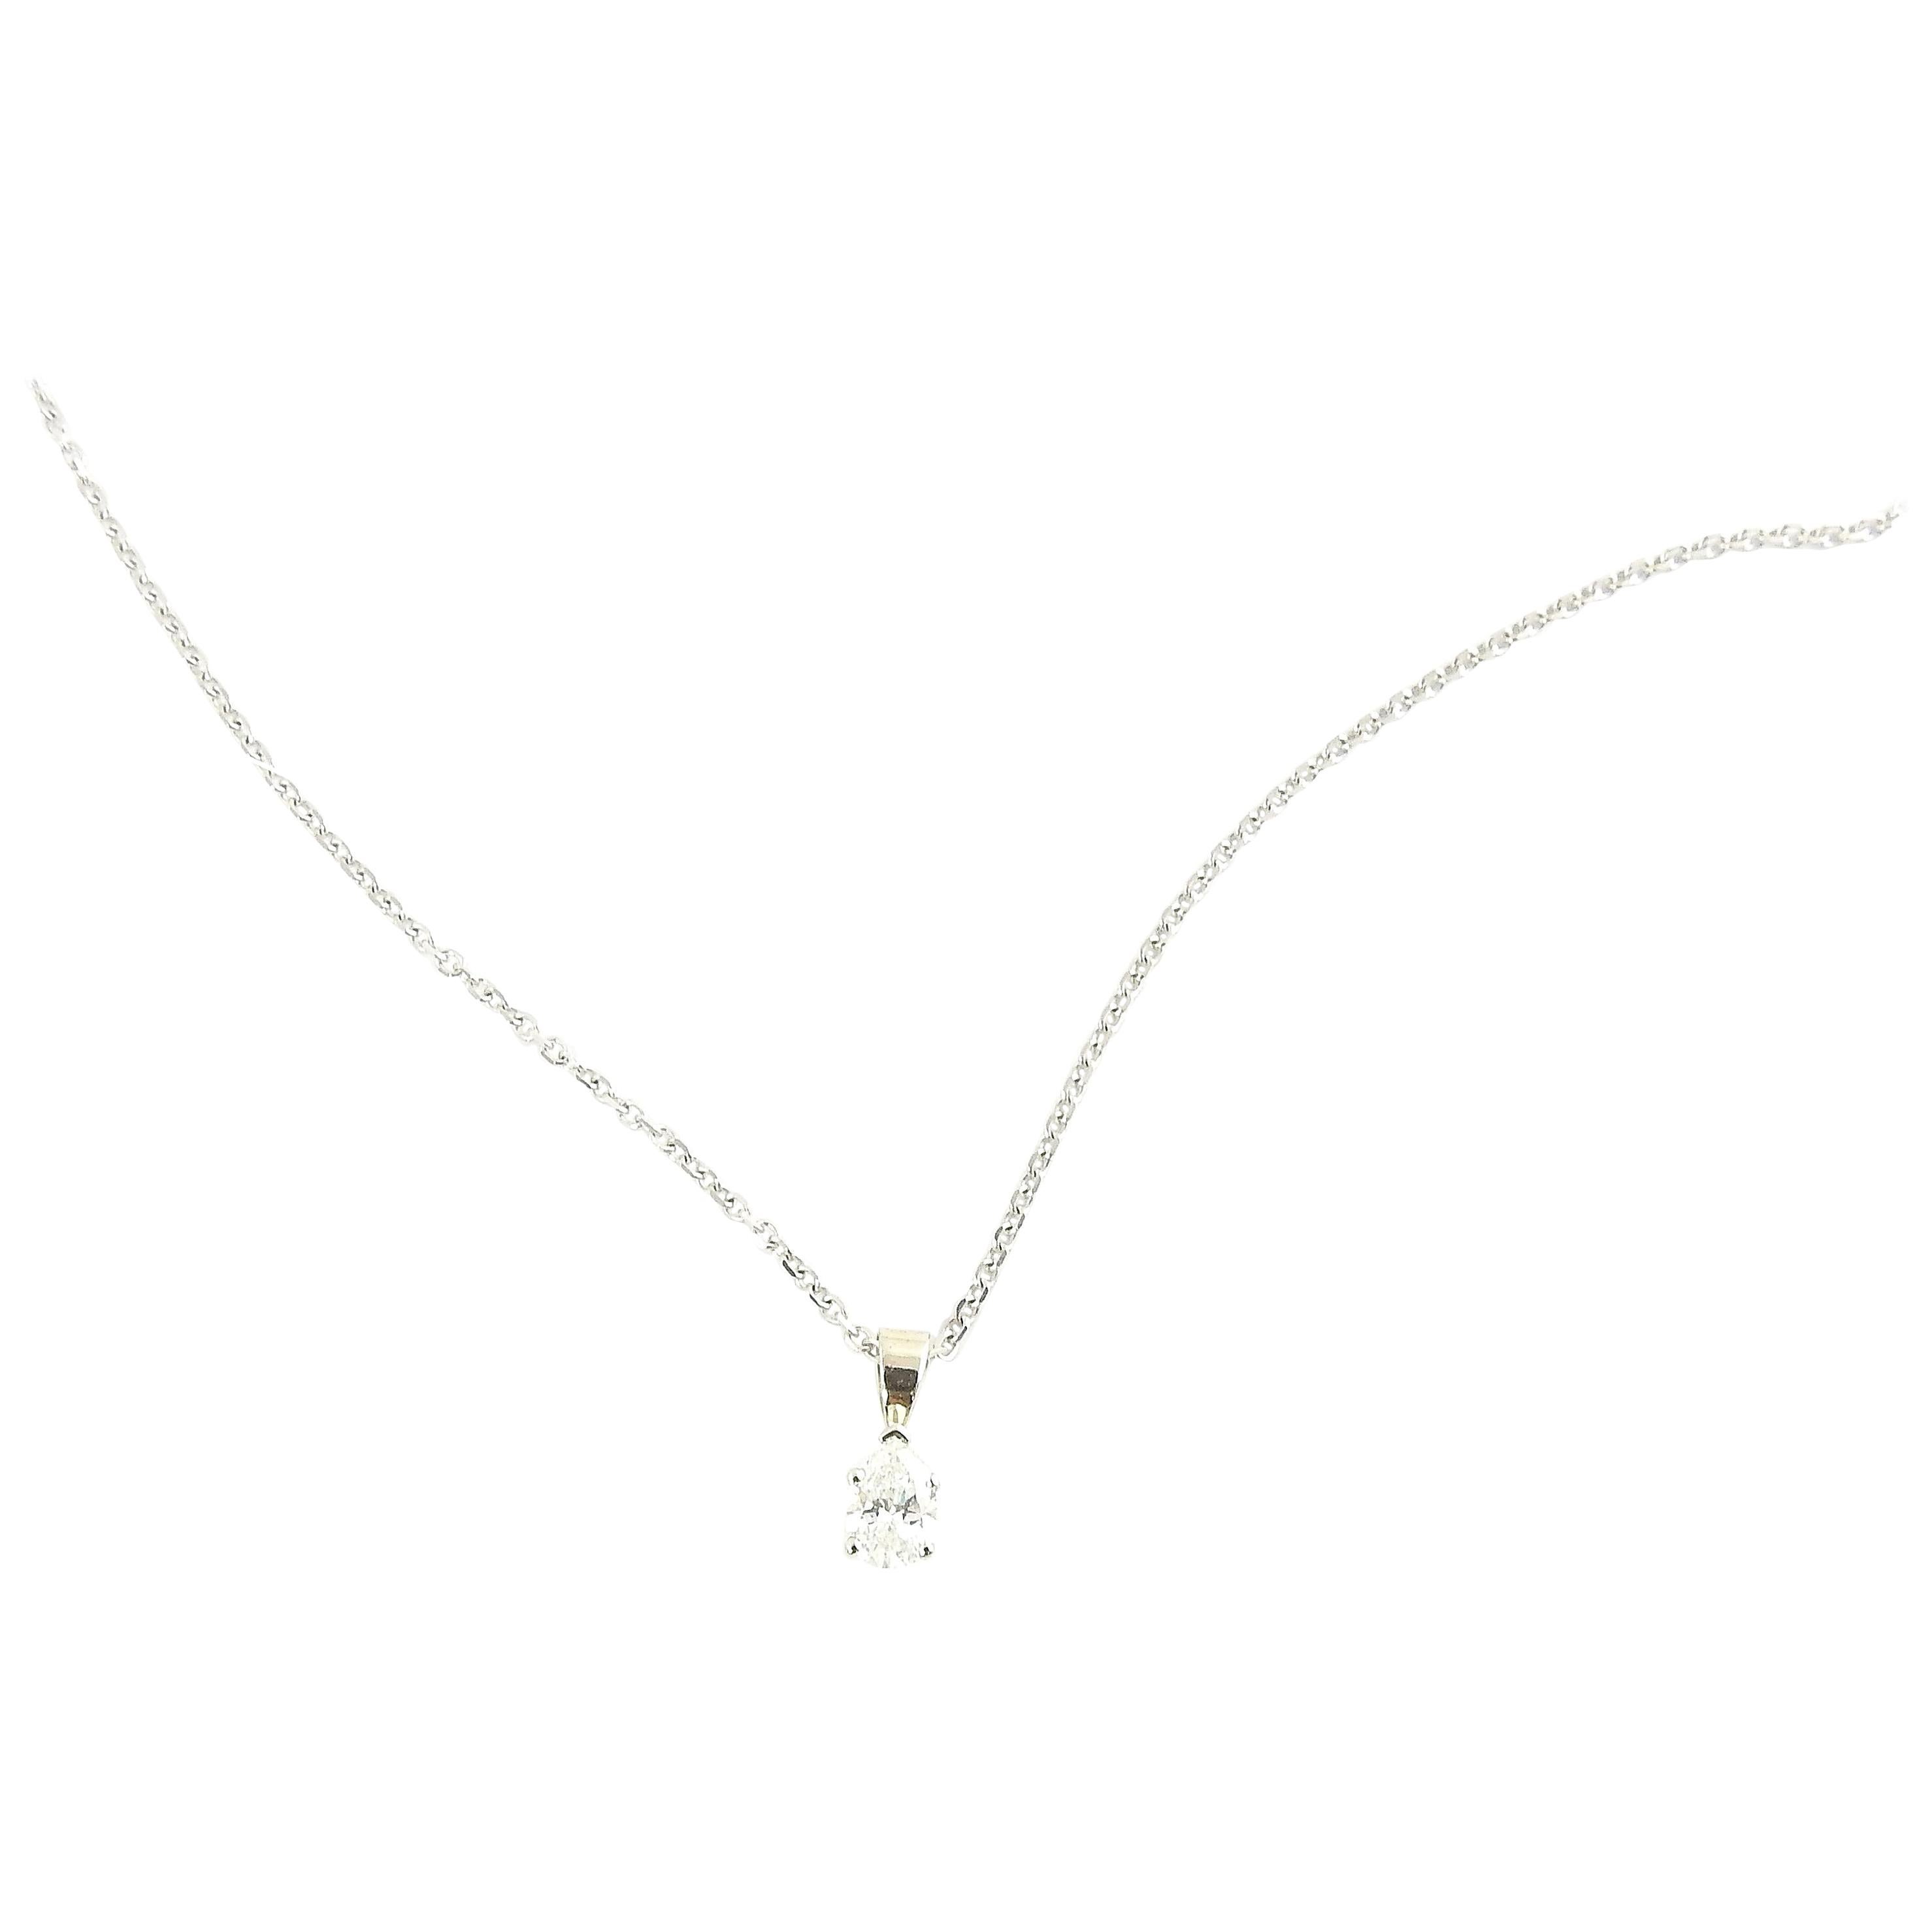 Vintage 14 Karat White Gold Diamond Pendant Necklace-

This sparkling pendant features one pear-shaped diamond suspended from a classic 14K white gold necklace.

Total diamond weight:  .71 ct. ( weighed on diamond scale)

Diamond clarity: 